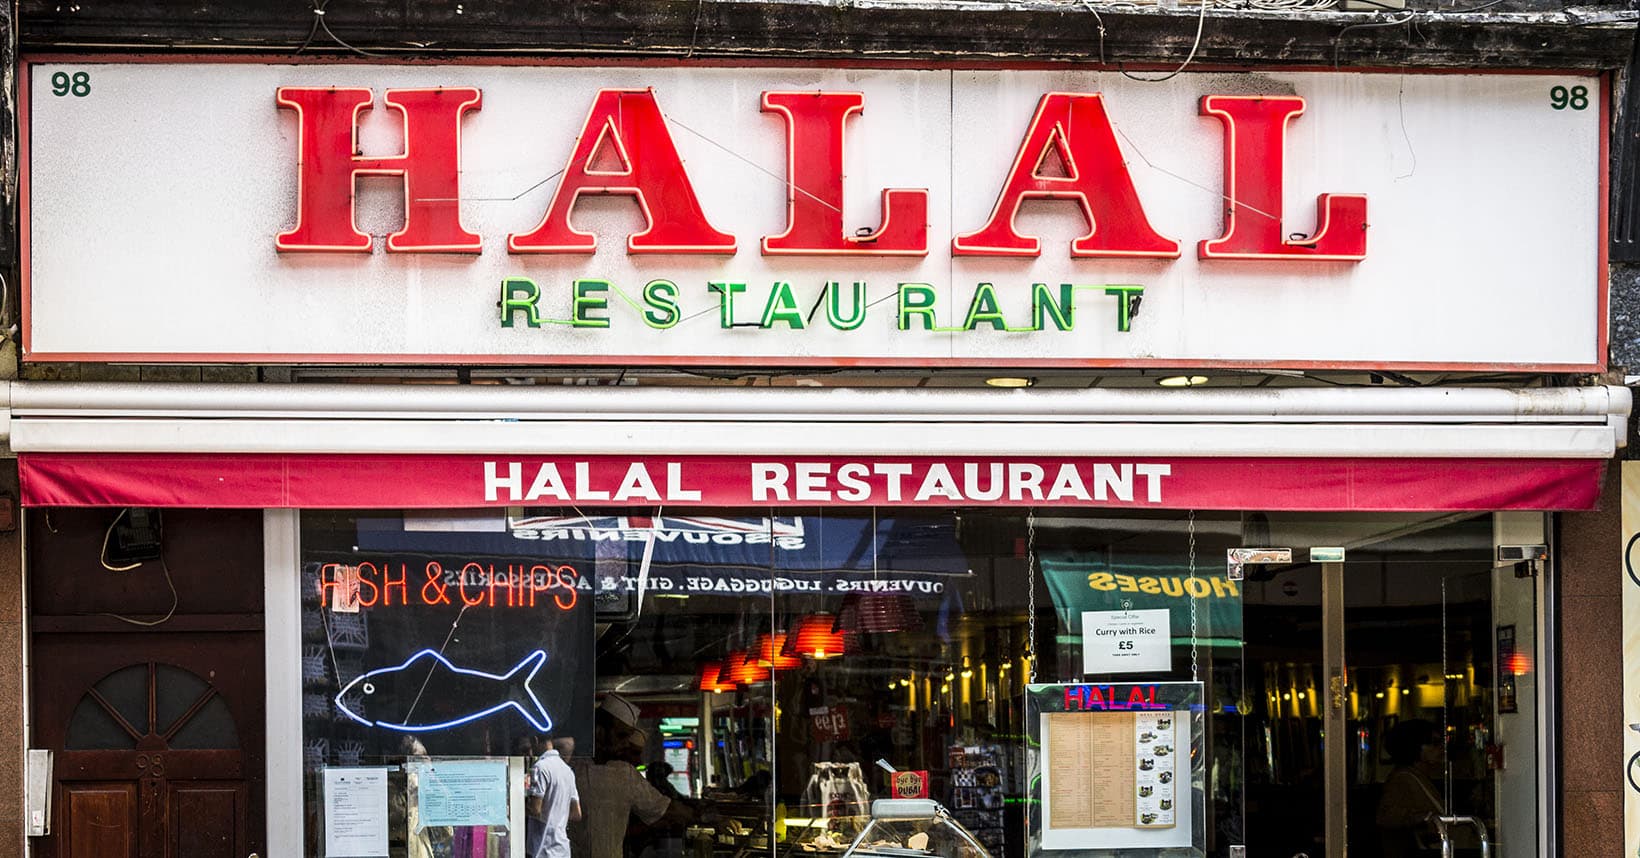 If you want to eat clean and green, is the future halal?